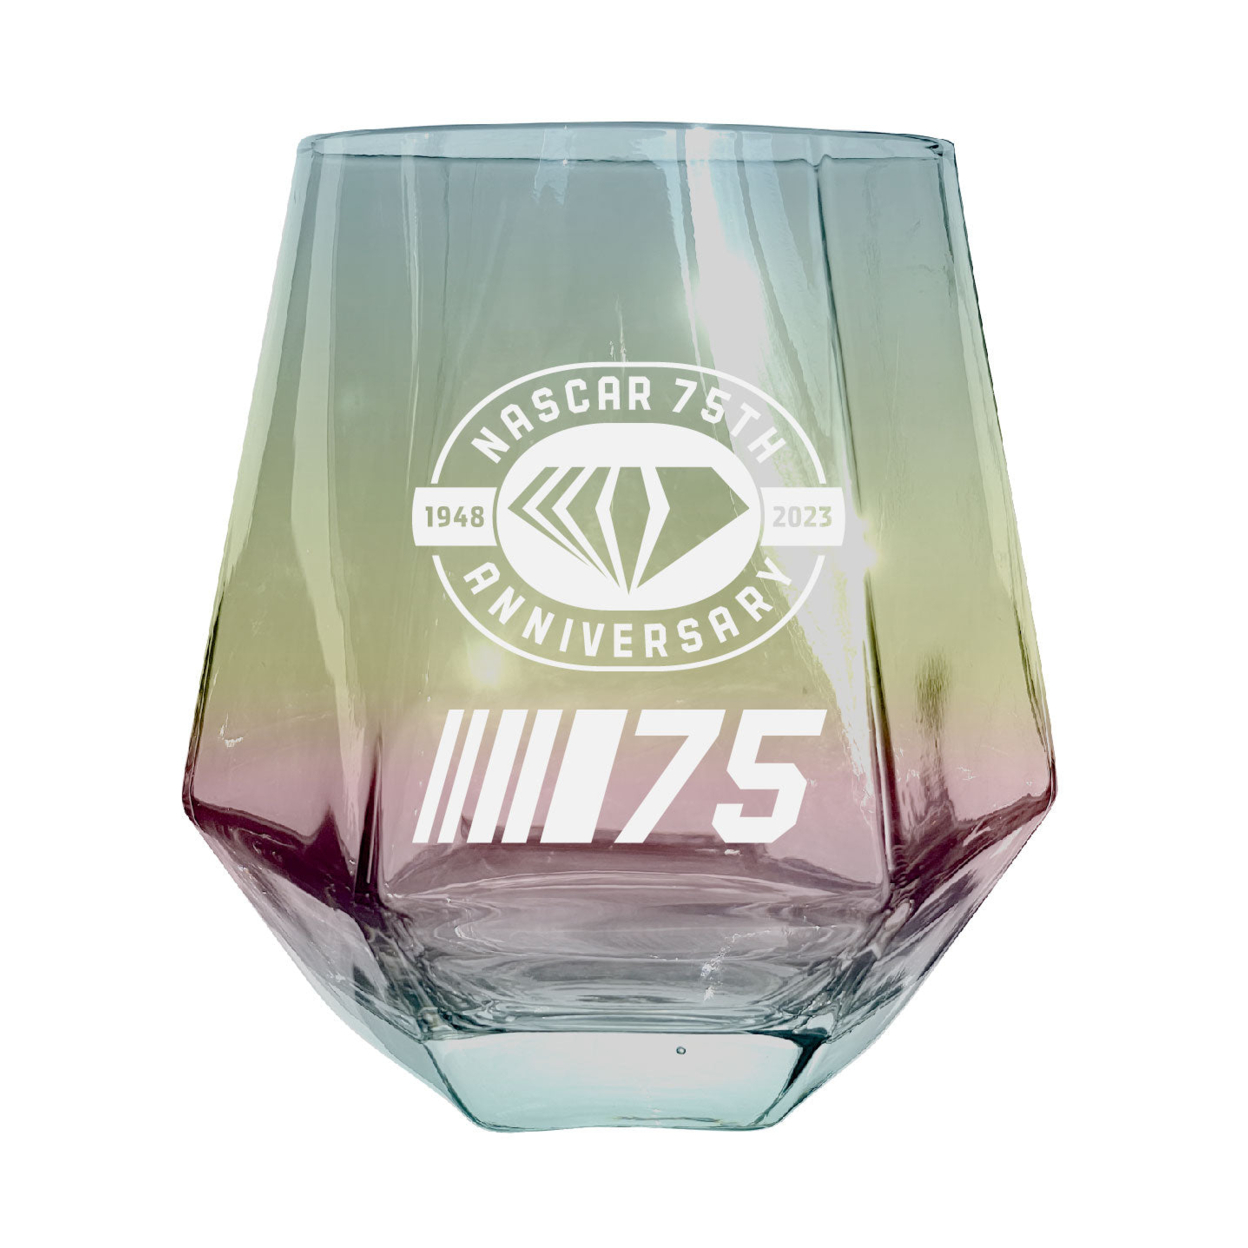 NASCAR 75 Year Anniversary Officially Licensed 10 Oz Engraved Diamond Glass - Grey, Single